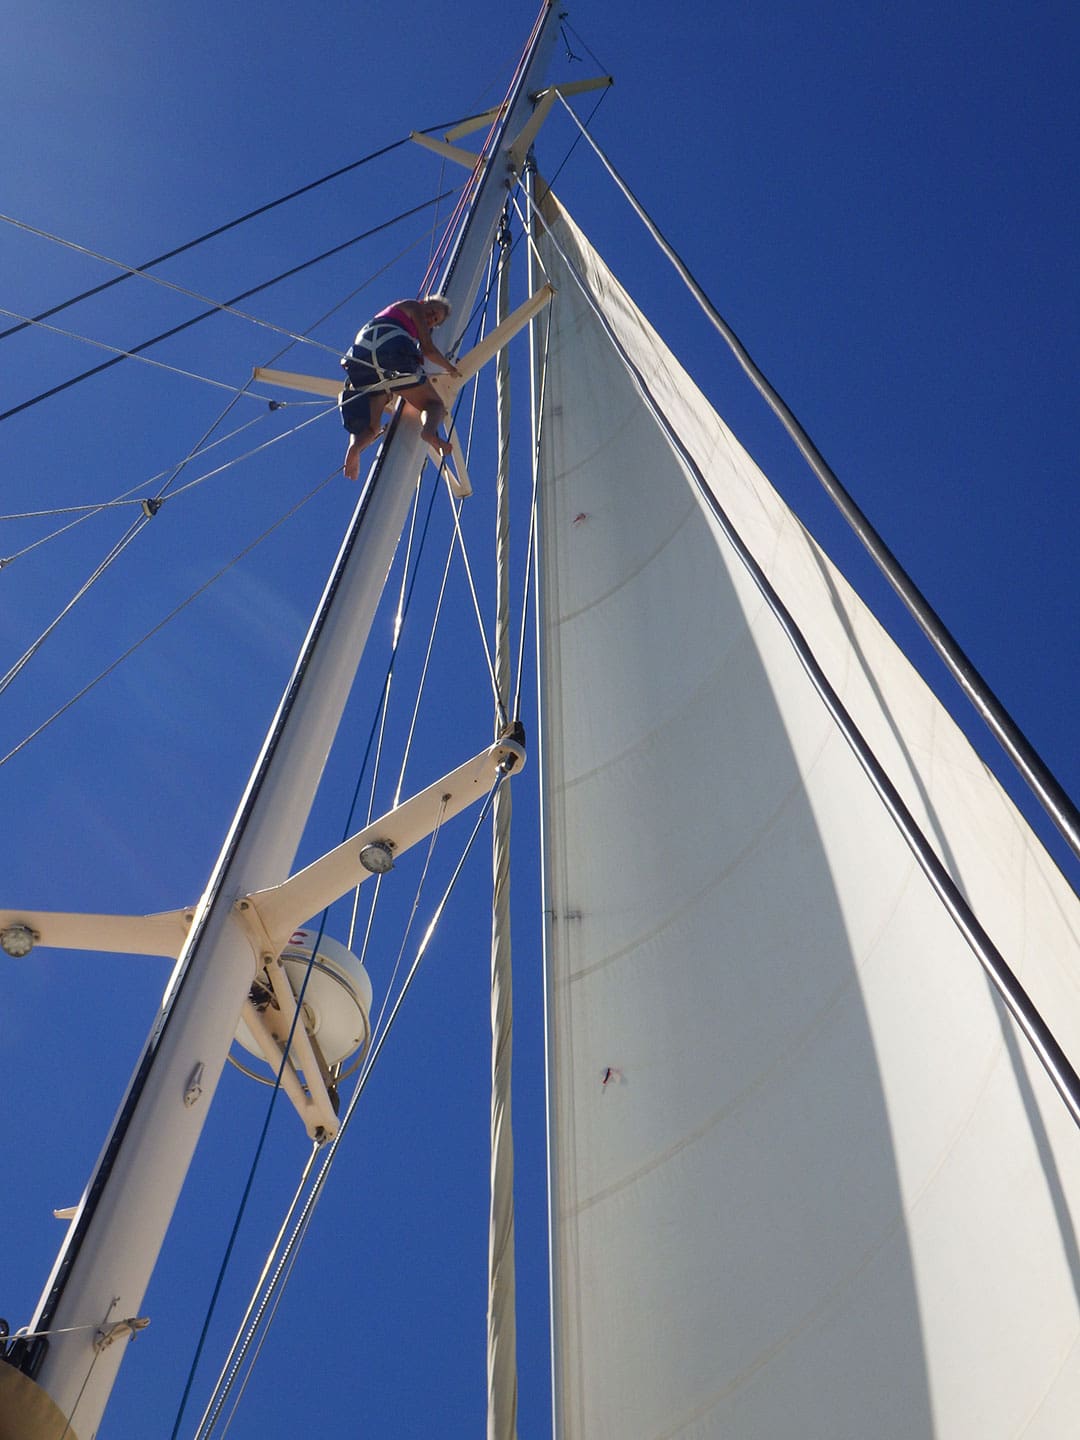 Lynne goes up the mast for a rigging check.